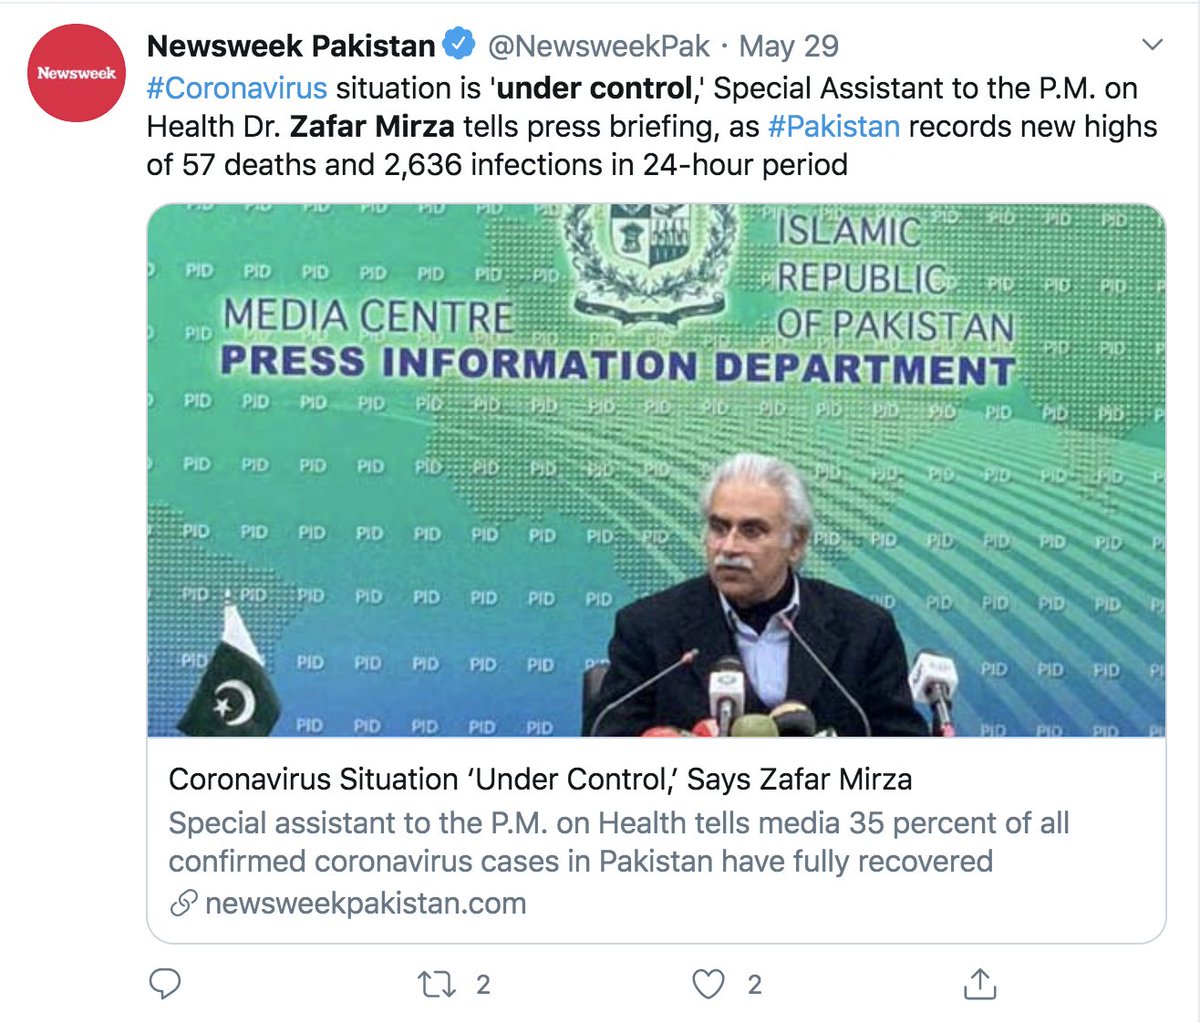 The doctors are openly warning that hospitals outside major metropolitans lack required facilities. The same Zafar Mirza was claiming on May 29 that situation was perfectly under control. PMA president refuted a similar claim by Asad Umar on weekend. /10  https://twitter.com/awaissaleem77/status/1273533847880306688